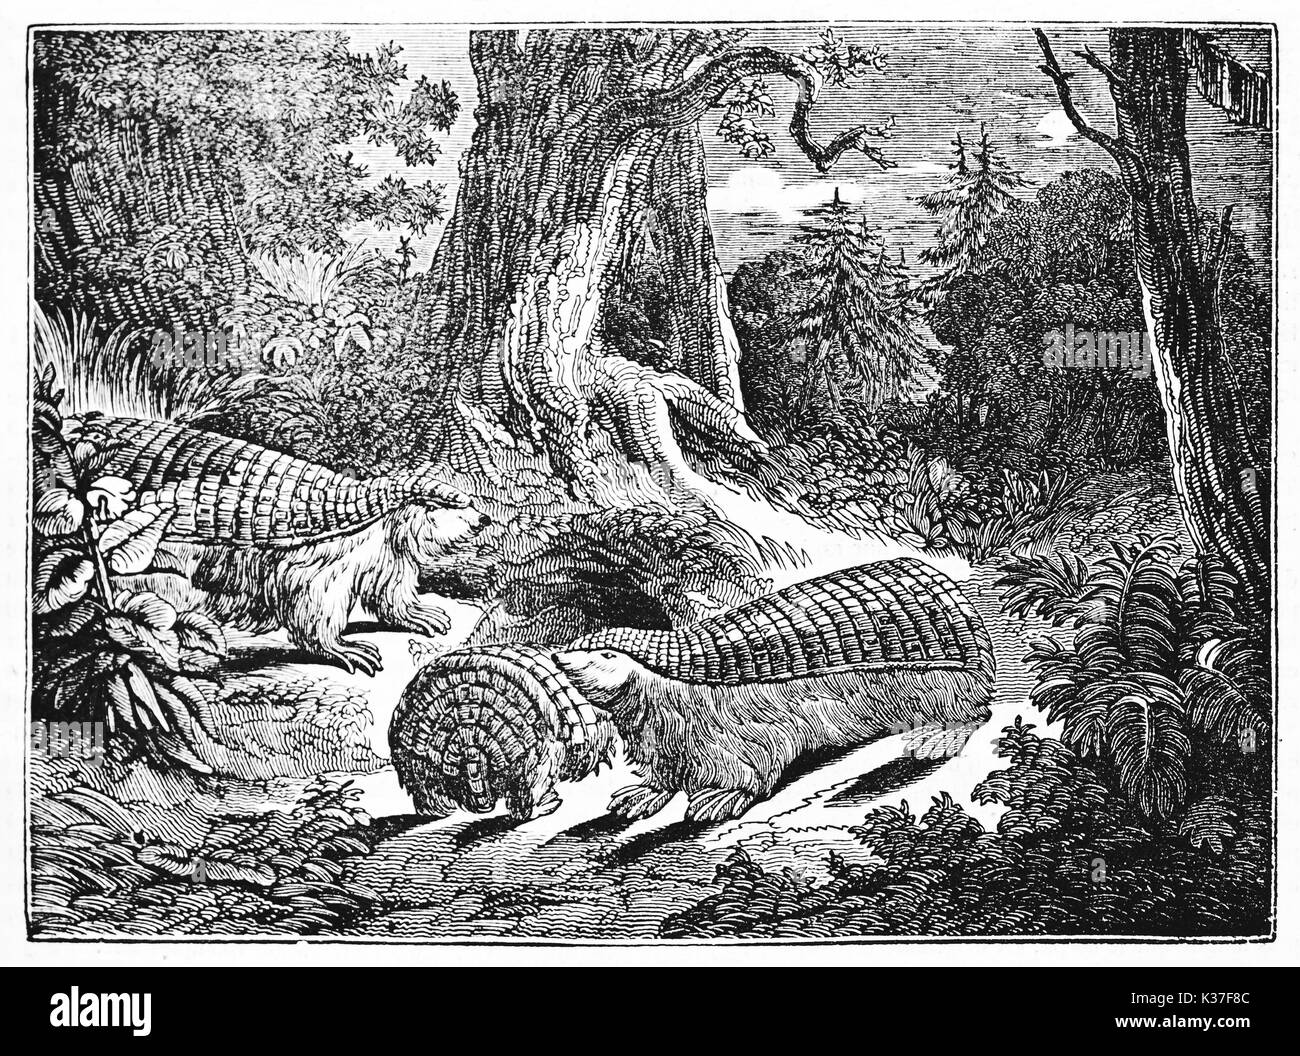 pink fairy armadillo family in the deep vegetation of a forest, scientific name is Chlamyphorus truncatus. Old Illustration by unidentified author published on Magasin Pittoresque Paris 1834 Stock Photo